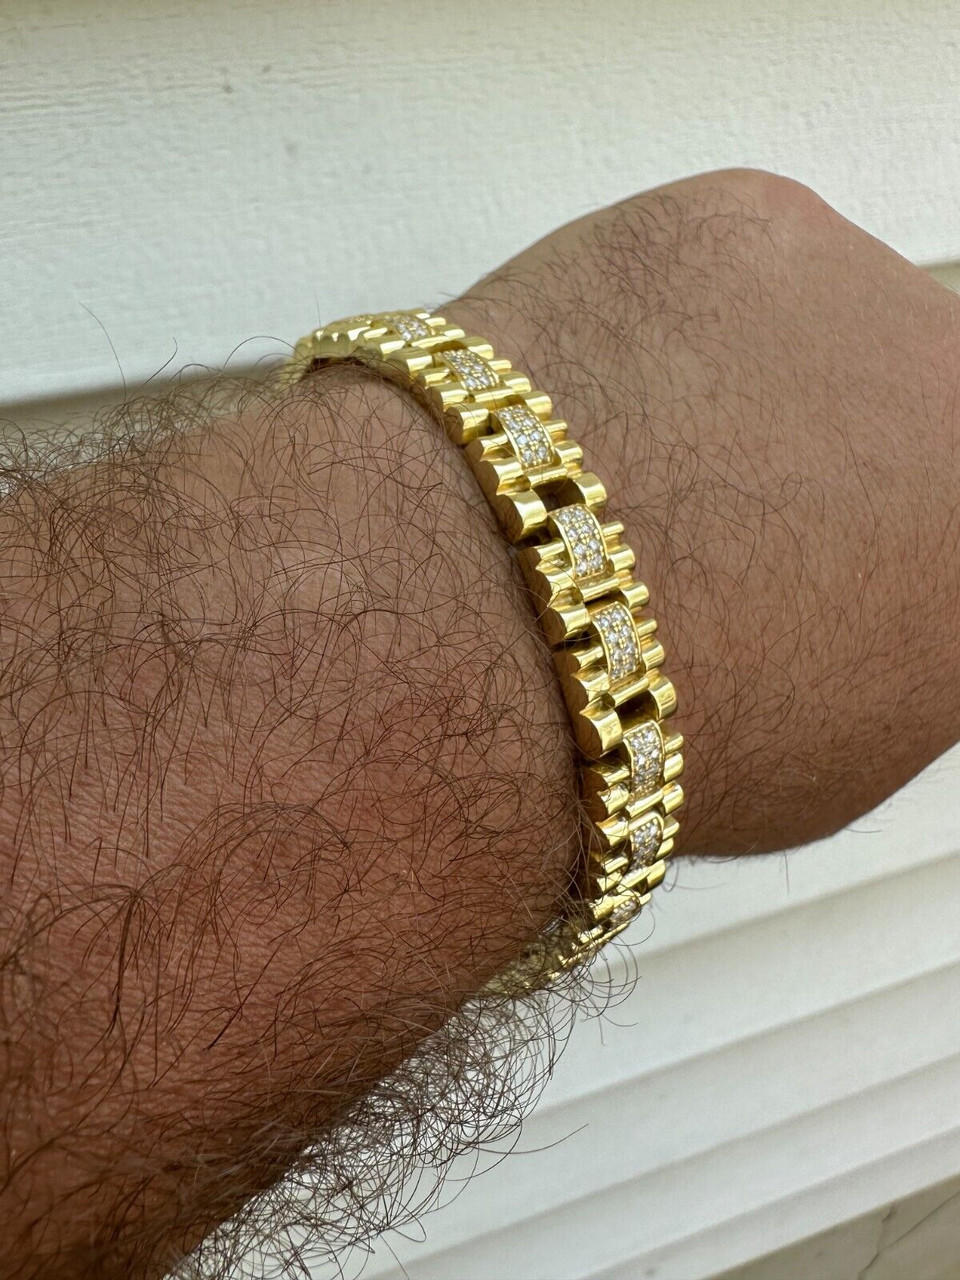 Diamond Cuban Link Bracelet 10mm in Yellow Gold - 7 Inches - Gold Presidents